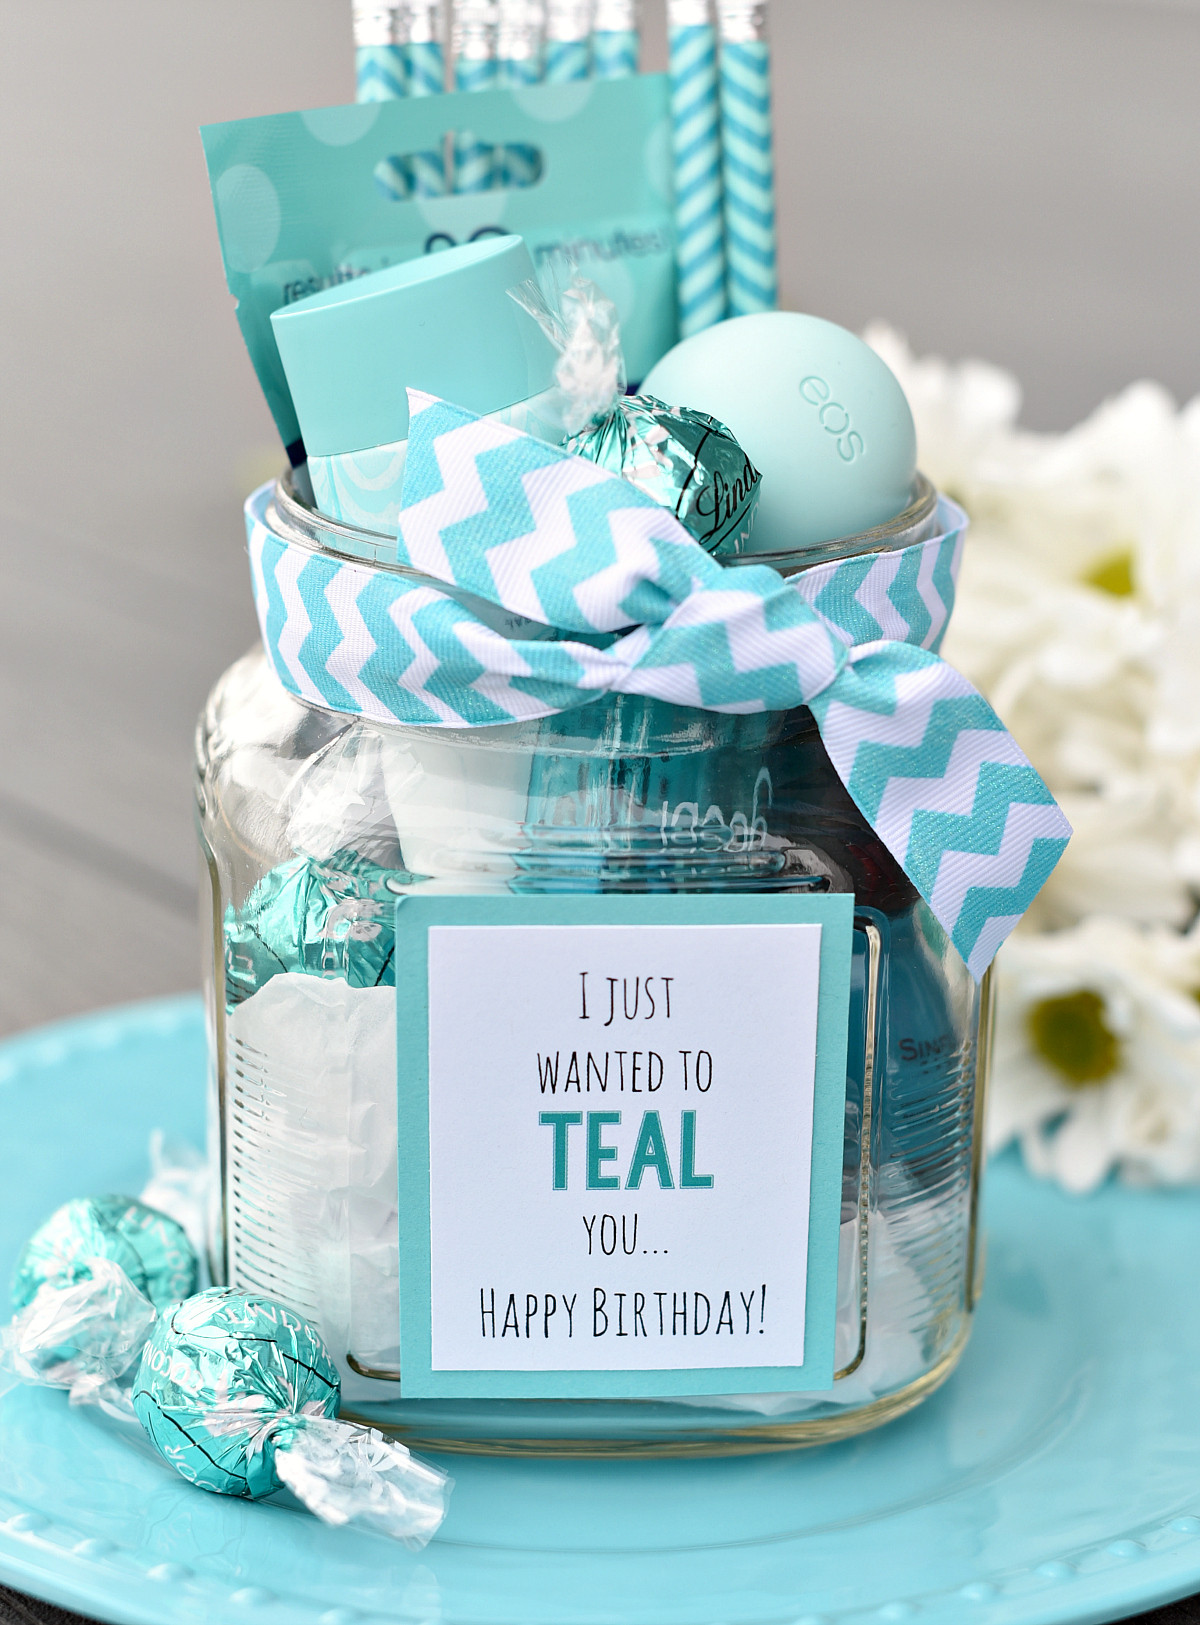 Birthday Gift Ideas For A Woman
 Teal Birthday Gift Idea for Friends – Fun Squared